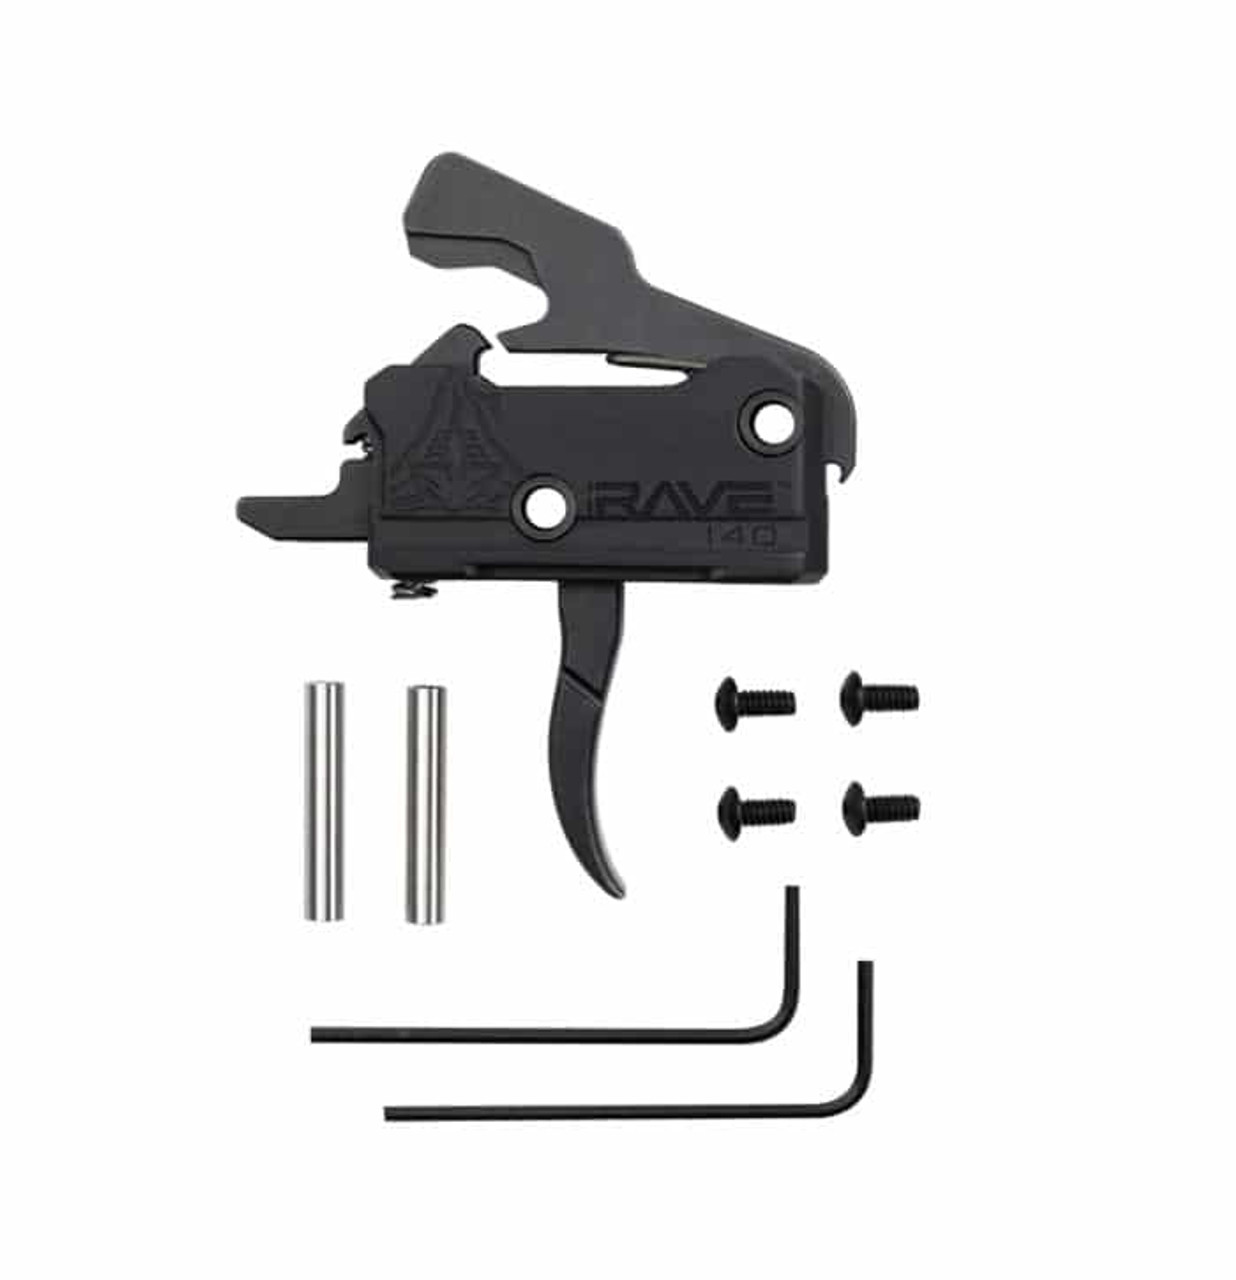 Rise Armament RAVE 140 Super Sporting Trigger, Curved, 3.5 lb Single Stage Pull, Black